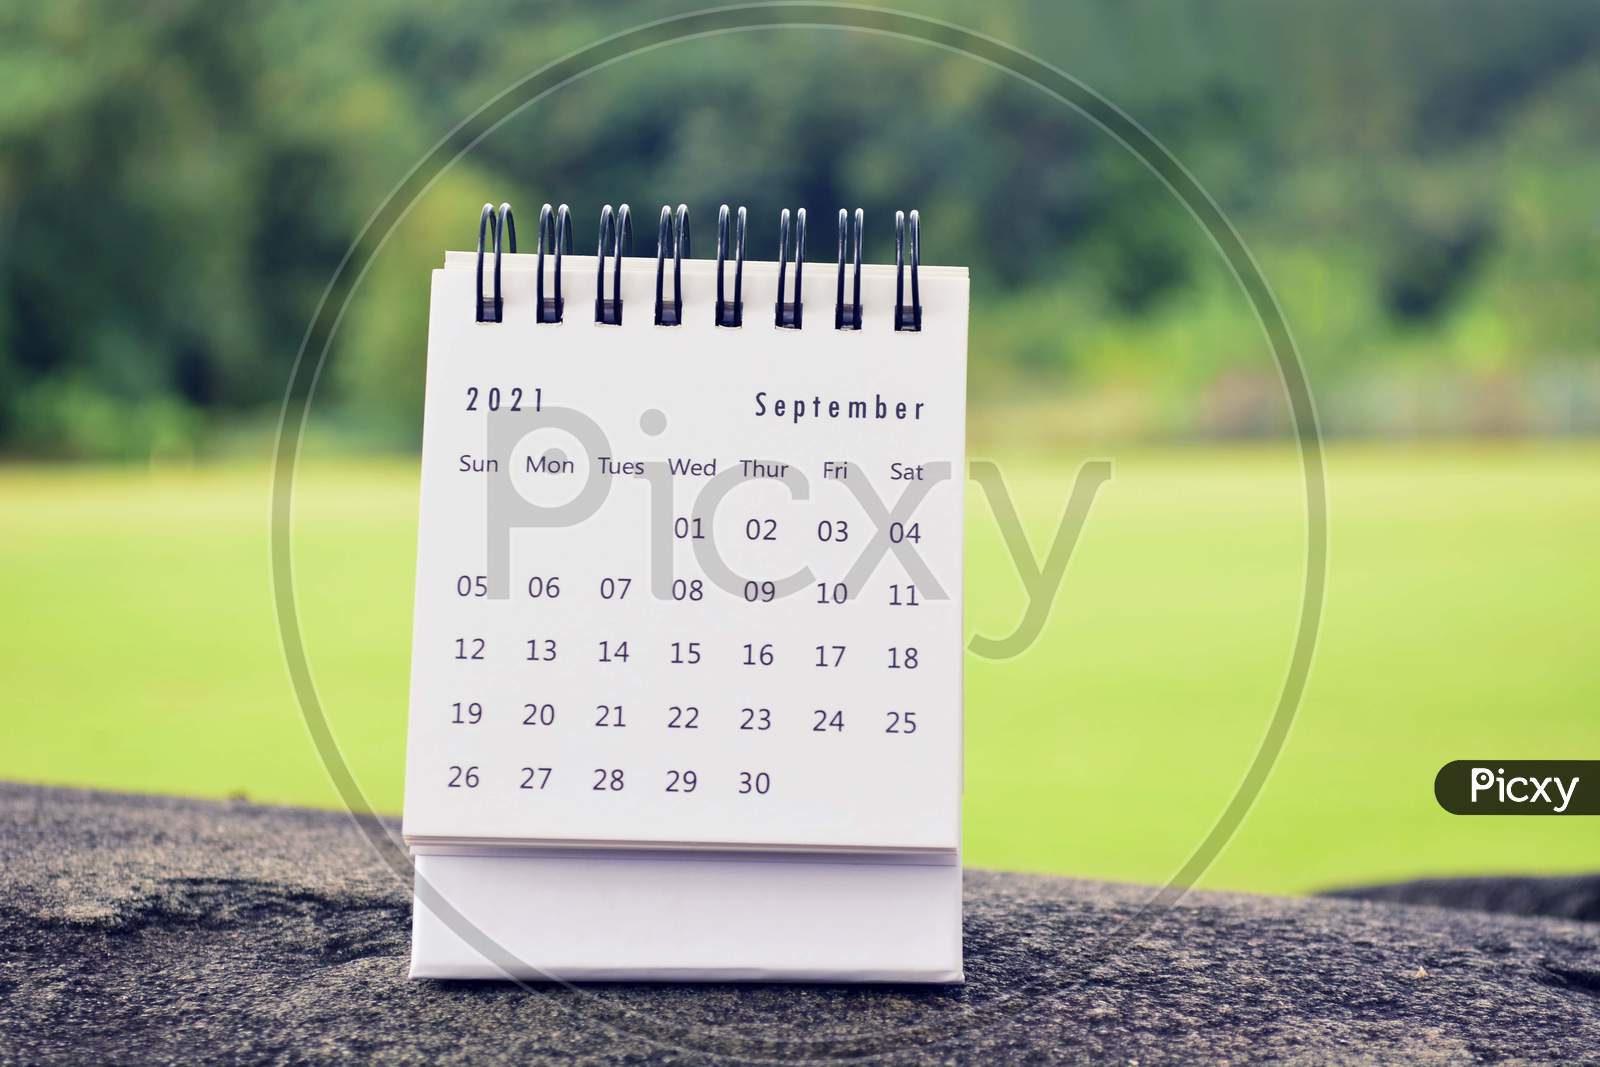 September 2021 White Calendar With Green Blurred Background